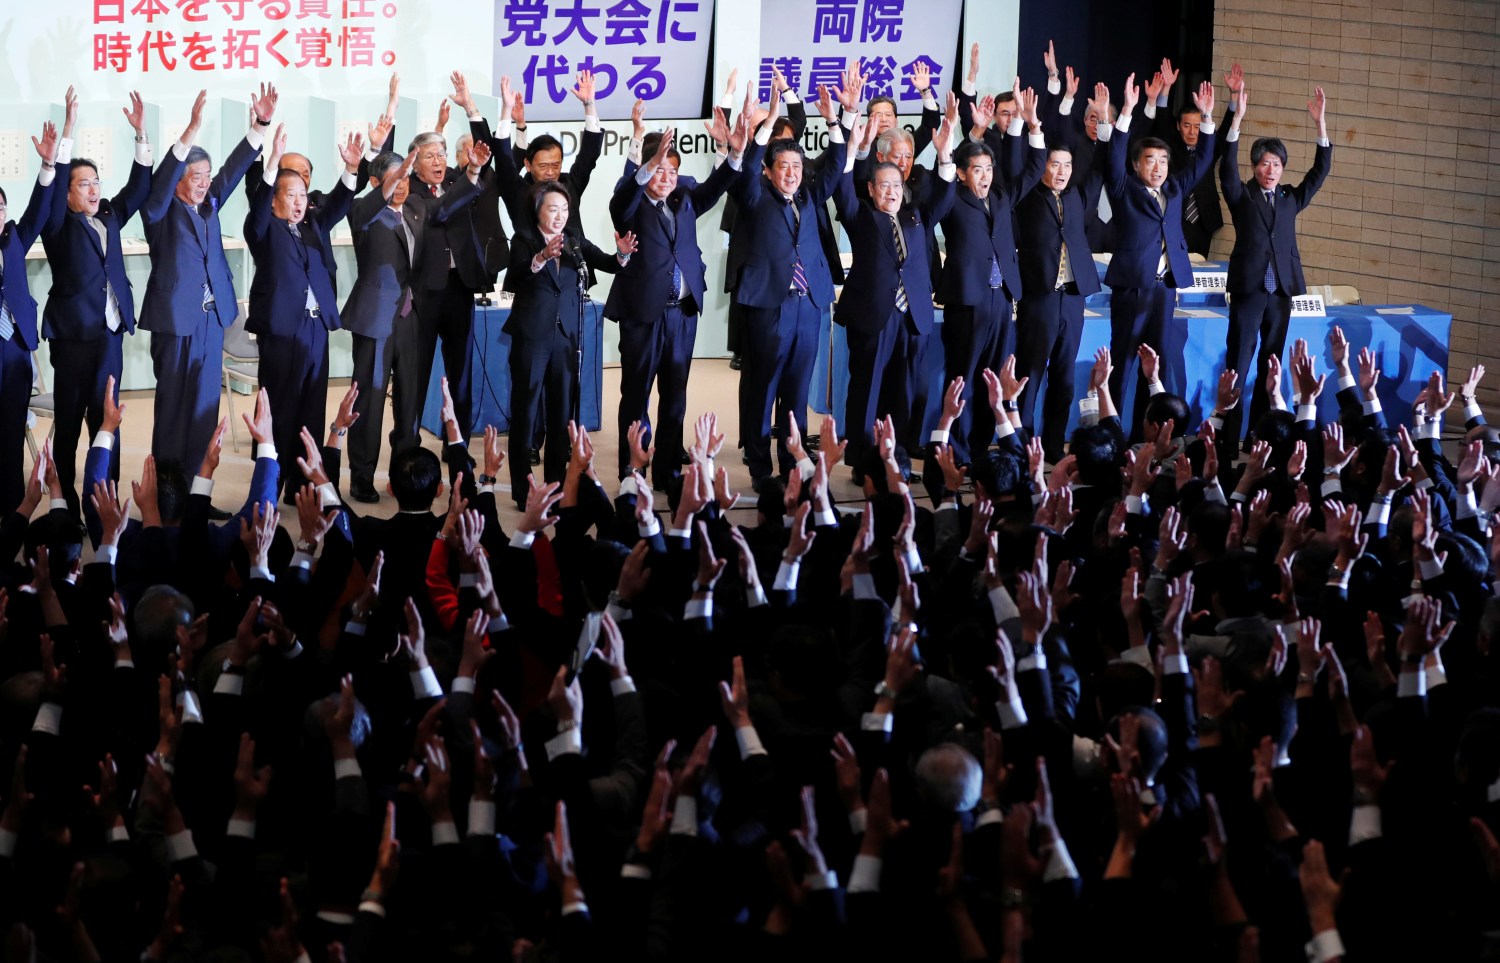 Japan's Prime Minister Shinzo Abe (C), who is also the ruling Liberal Democratic Party's (LDP) leader, shouts 'Banzai' (cheers) as he raises his hands with members of LDP after winning the leadership vote at the party's headquarters in Tokyo, Japan  September 20, 2018.   REUTERS/Toru Hanai - RC1FA0EC7870